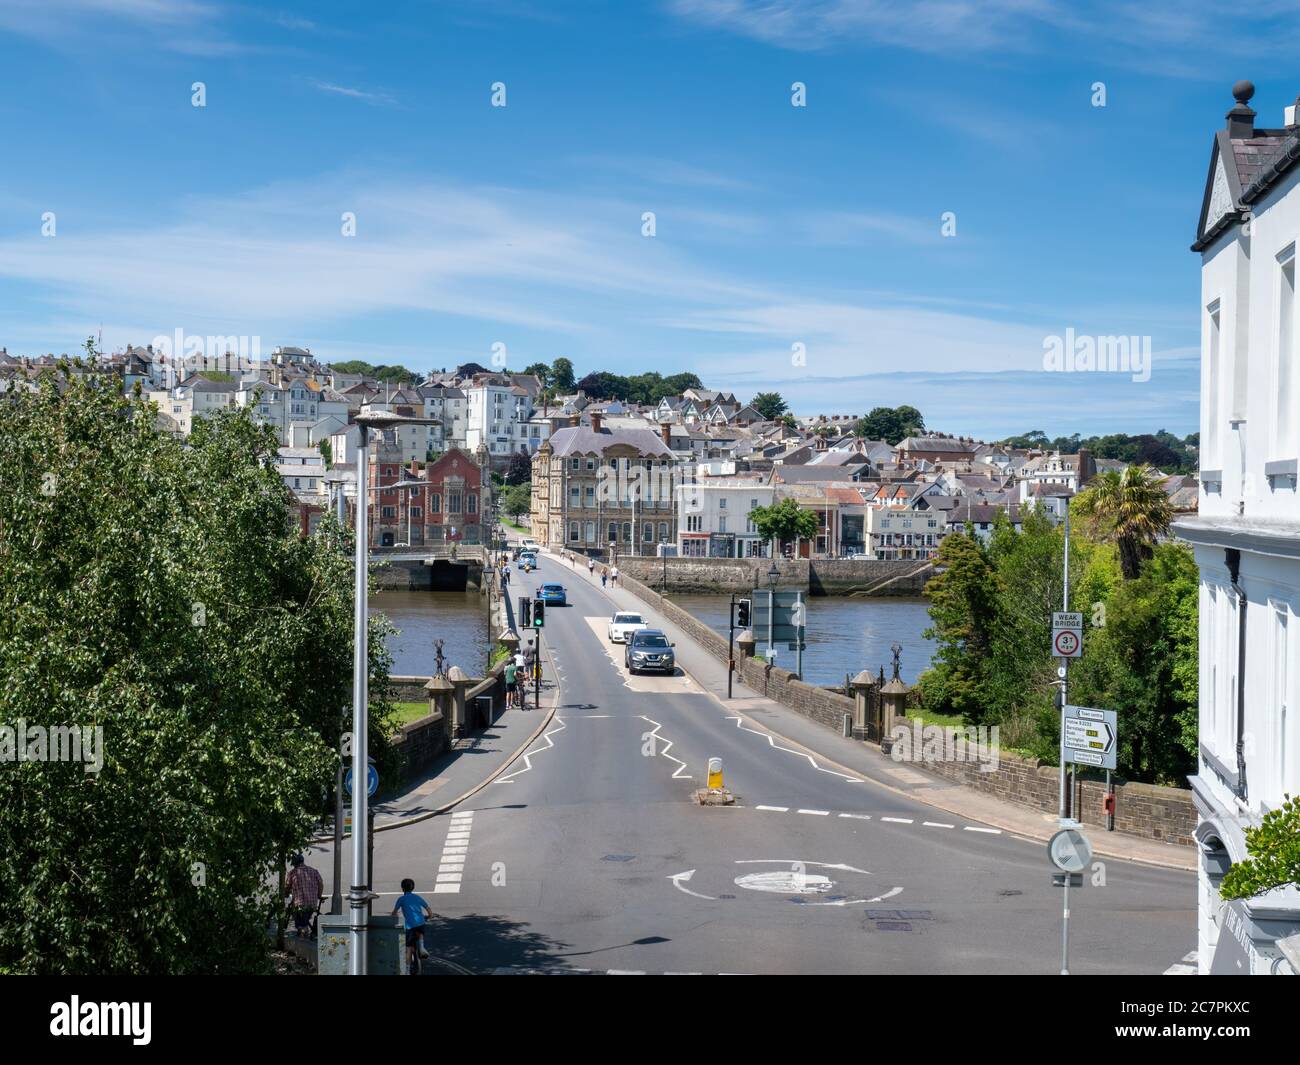 BIDEFORD, DEVON, UK - JULY 12 2020: View over the Long Bridge from East-the-Water. Stock Photo